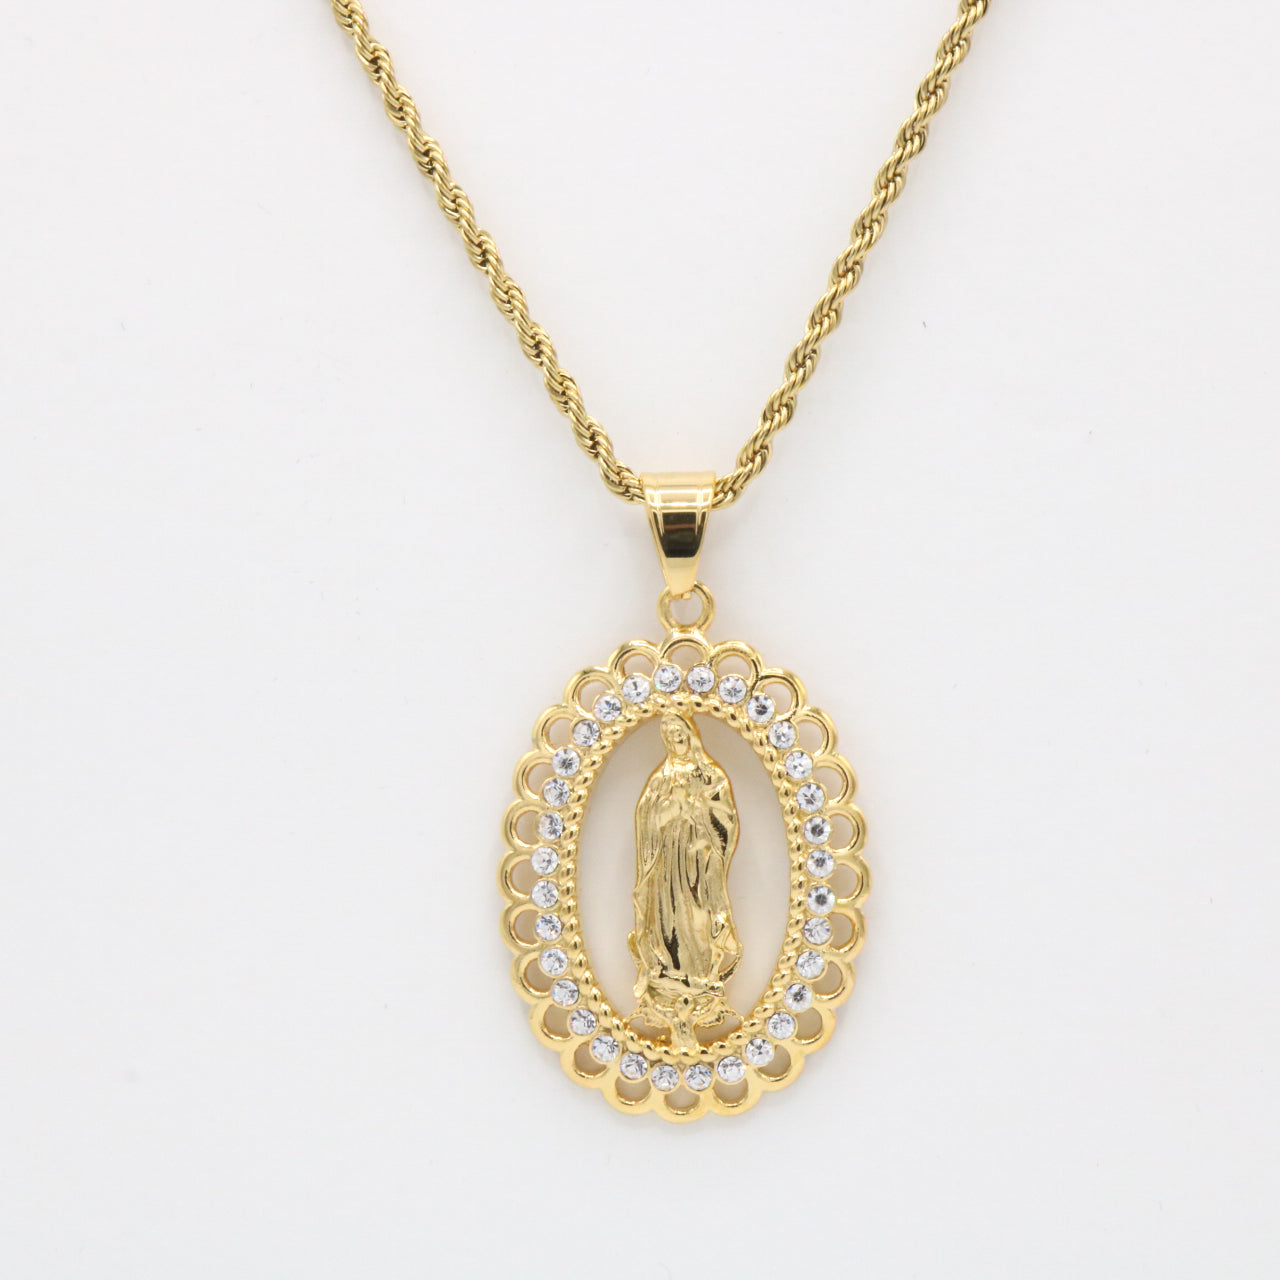 Virgin Mary with stones Pendant - Gold